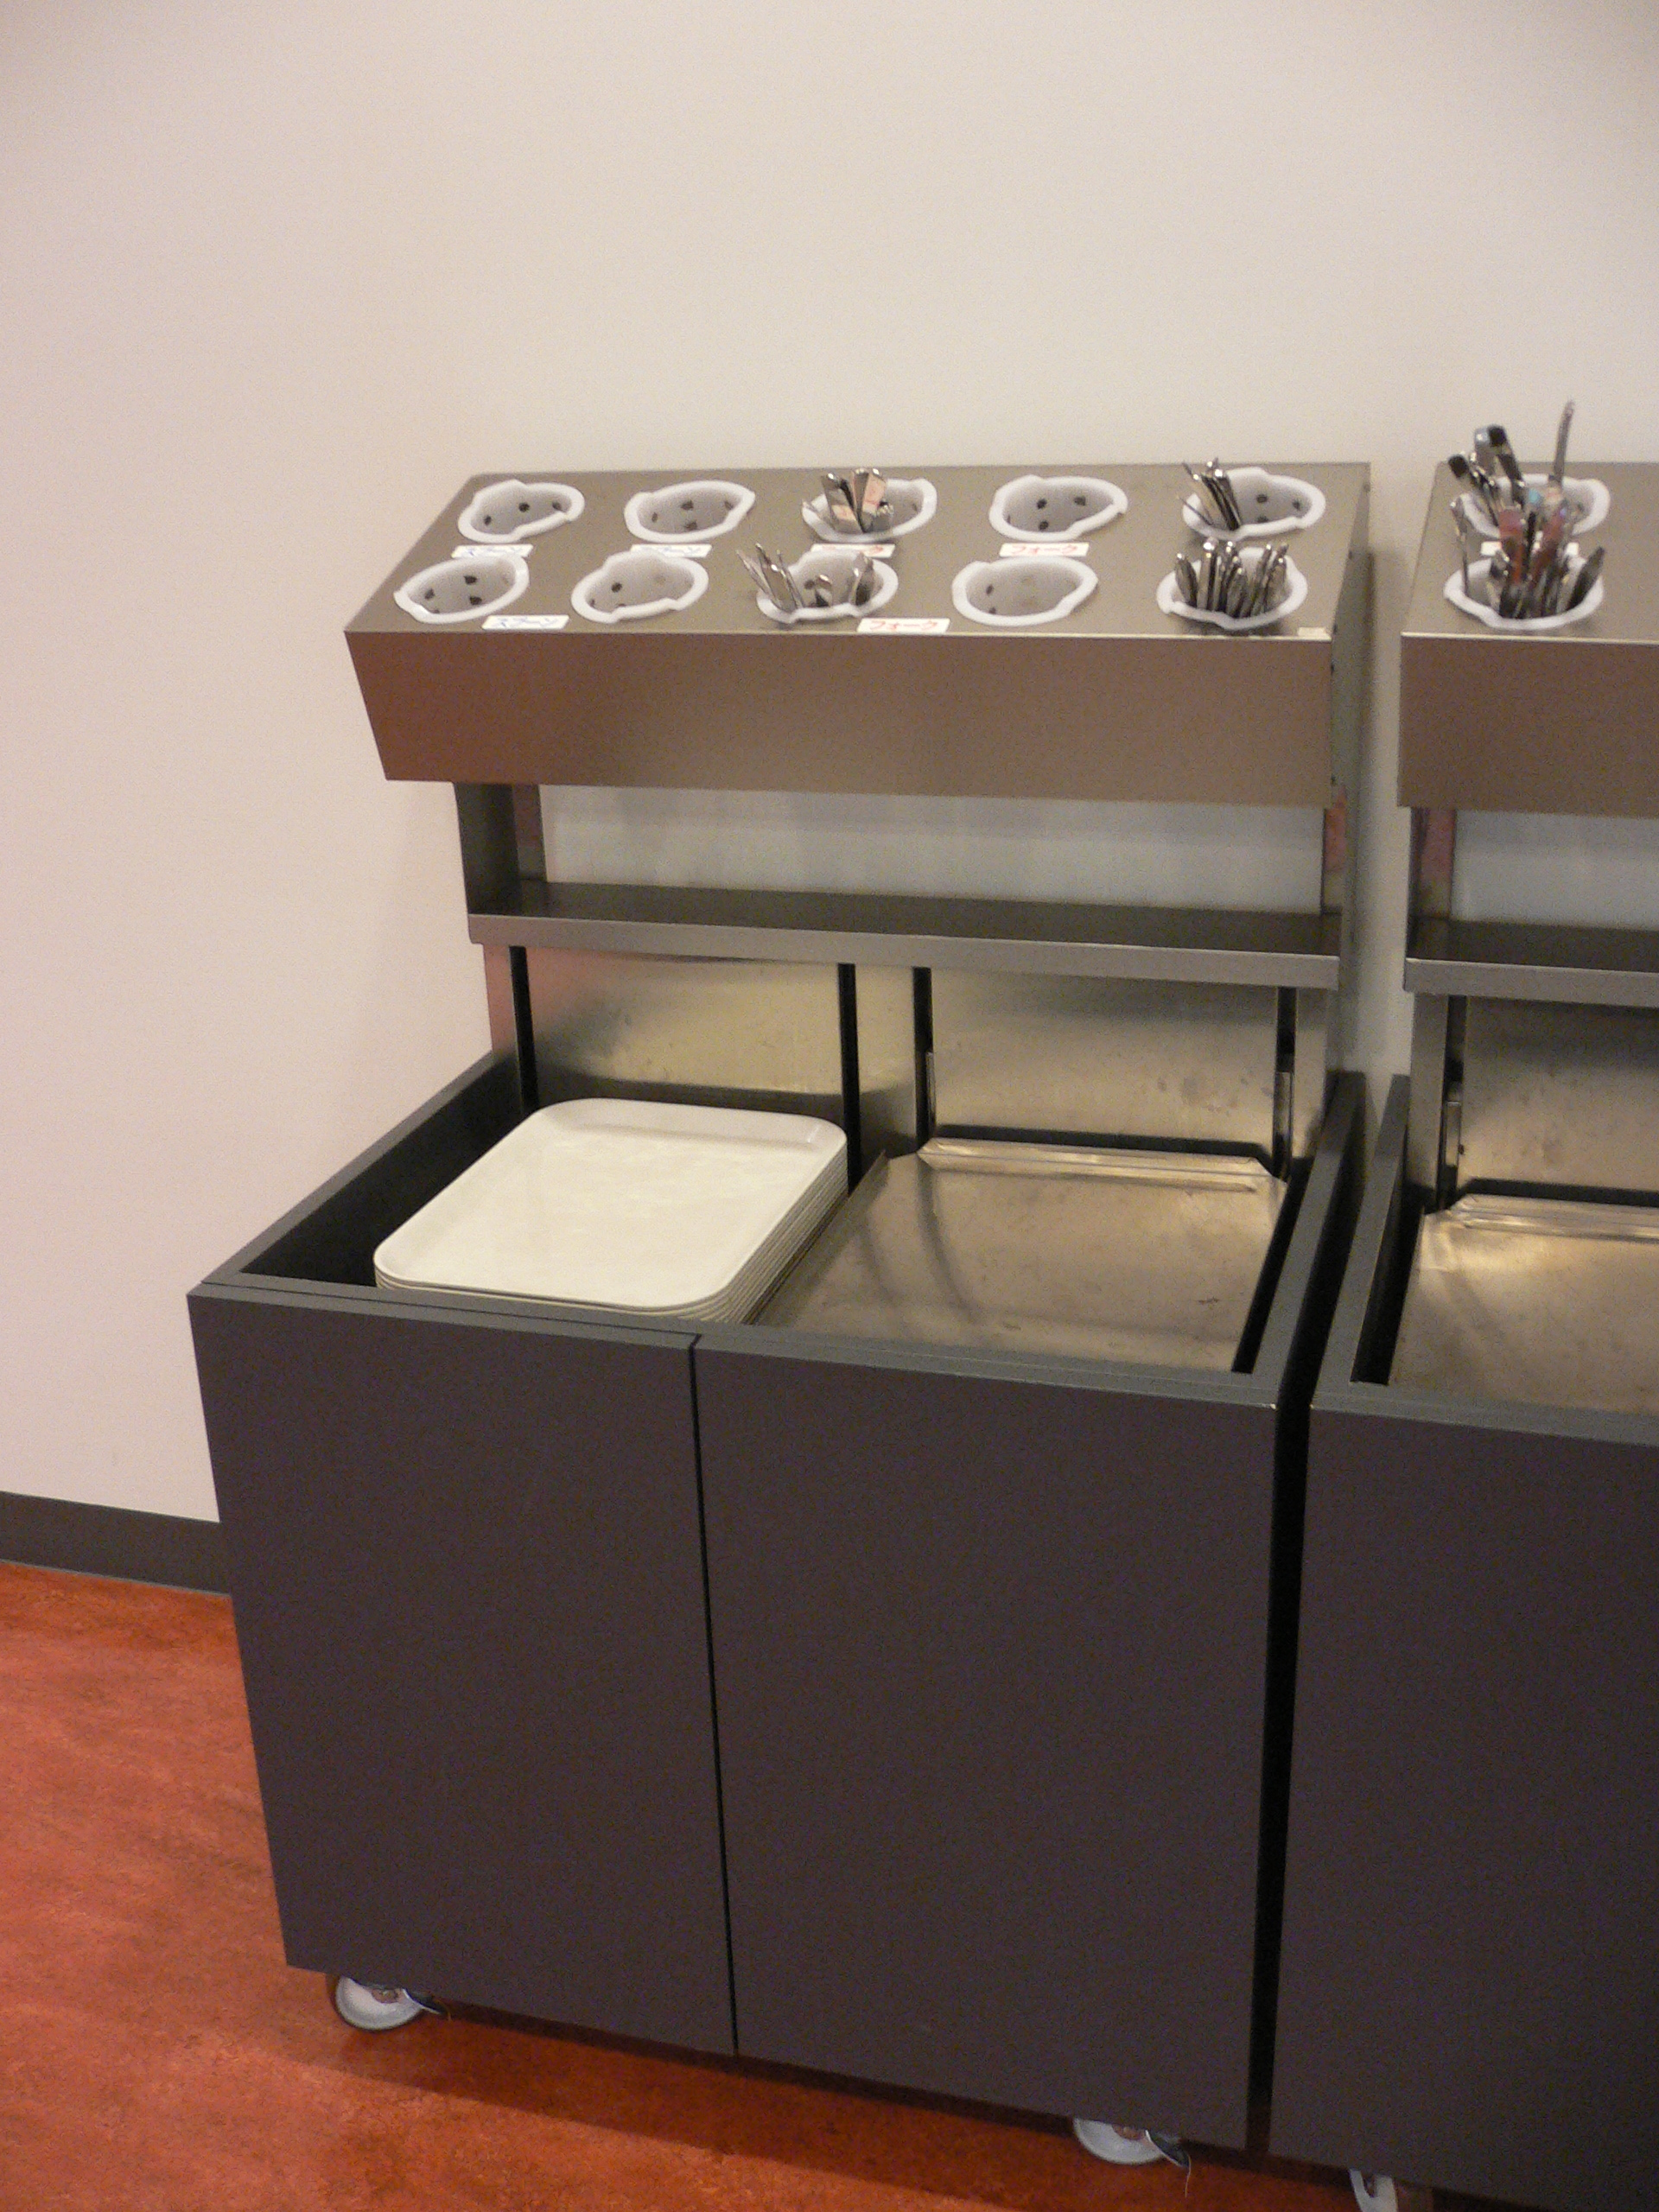 A stack of trays at a cafeteria. Only the topmost tray is visible due to a built-in spring.